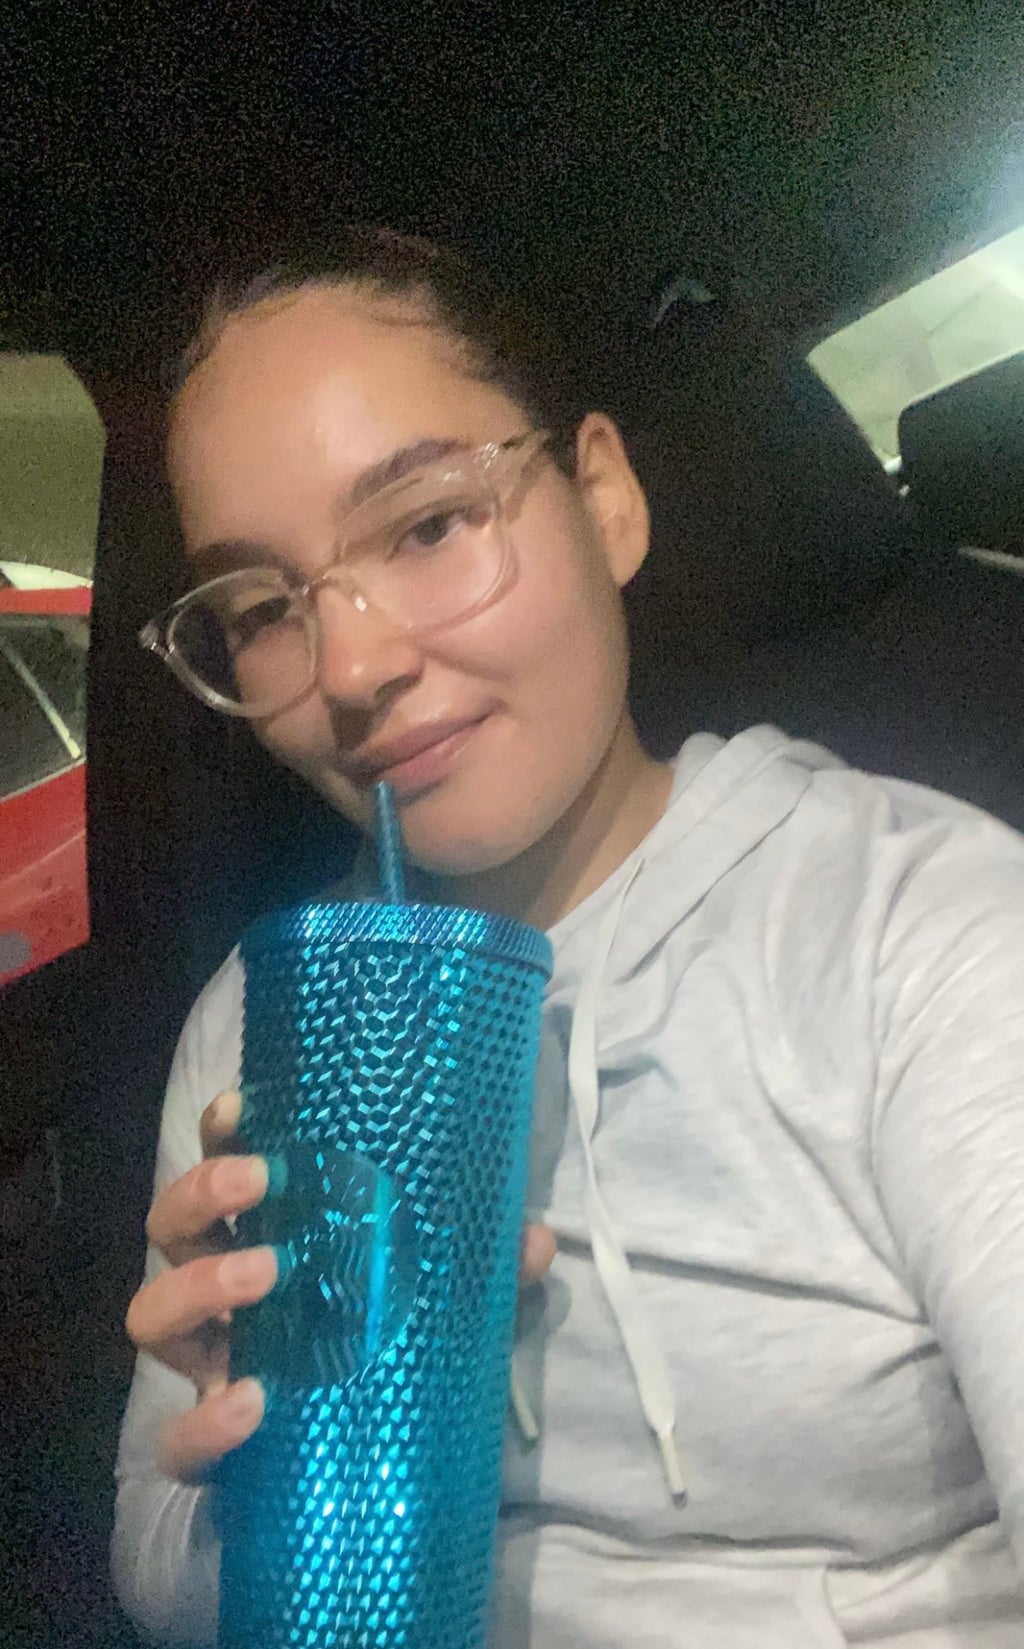 Gloria sipping from a Starbucks blue tumbler